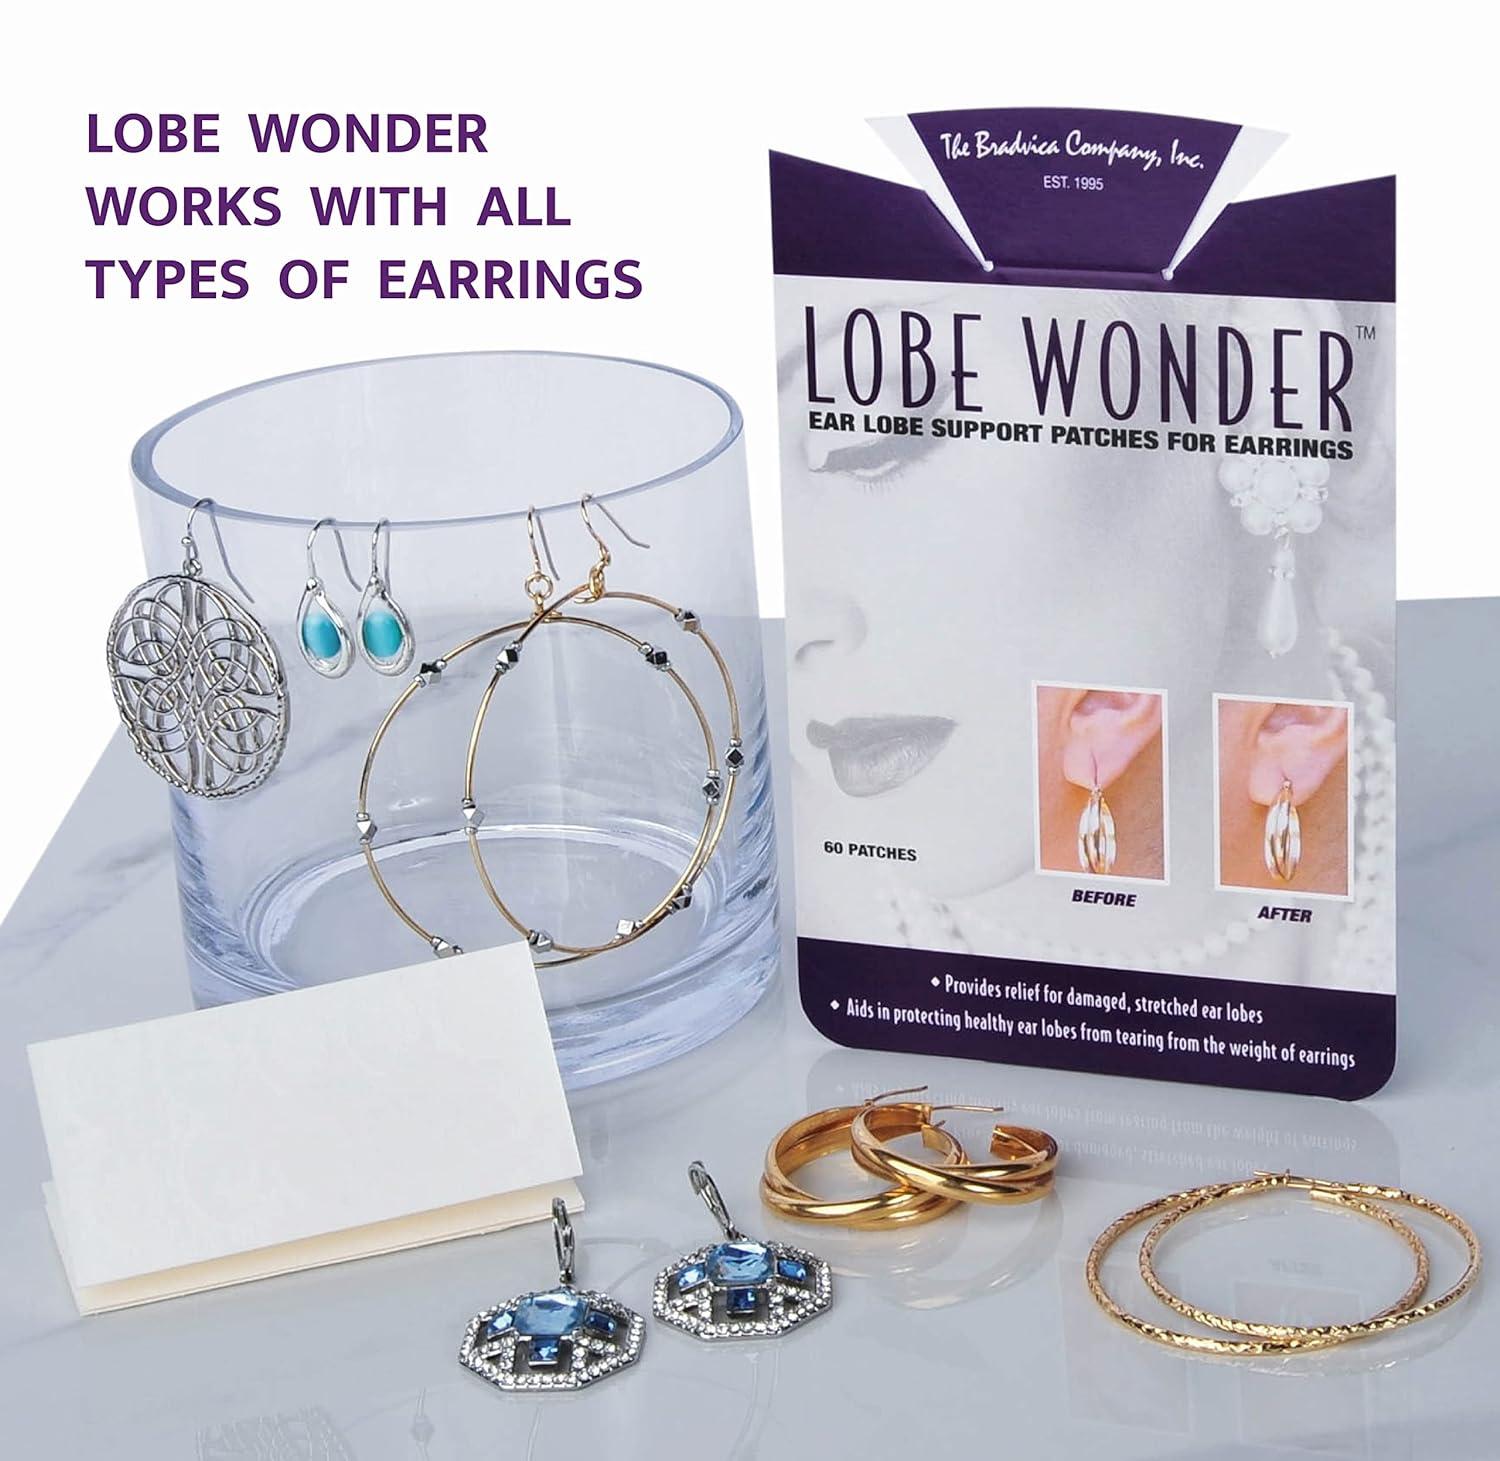 Lobe Wonder Earring Support Patches 60-Count (Pack of 4)